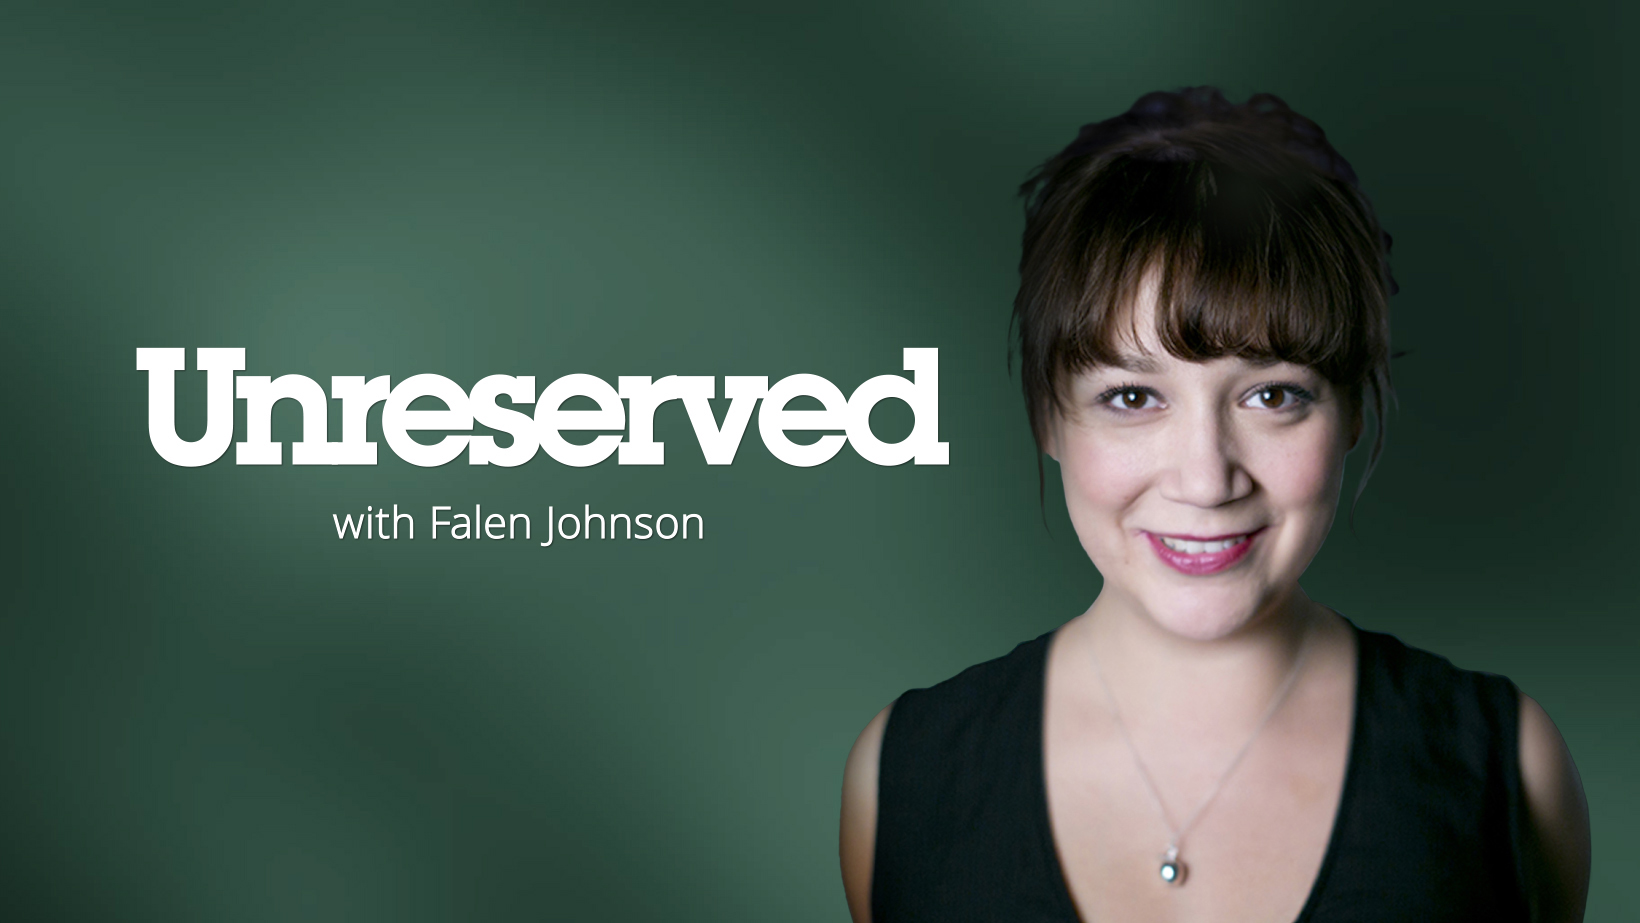 The words "Unreserved with Falen Johnson" on a green background beside a portrait of the host